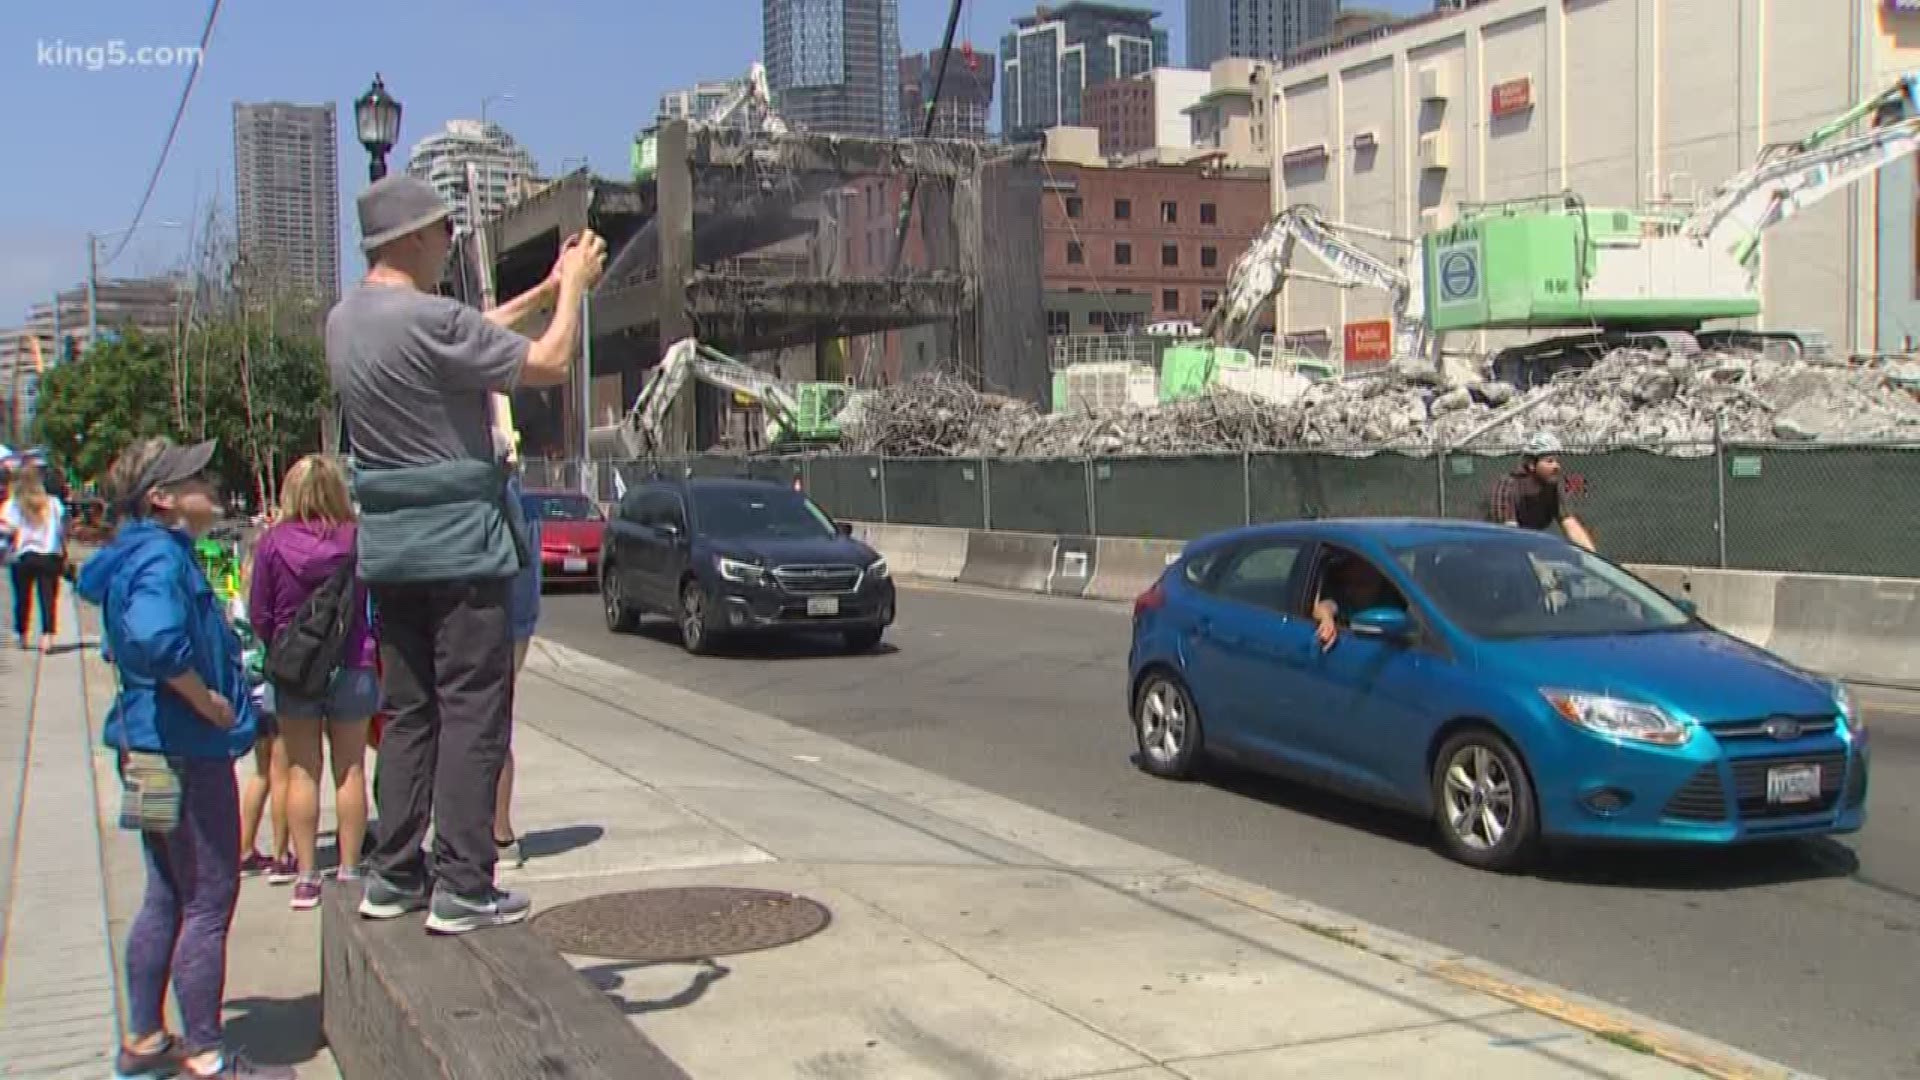 KING 5's Glenn Farley spoke with thrilled tourist who can still see dinosaur like machines eat away at the viaduct, and business owners frustrated with all the commotion.